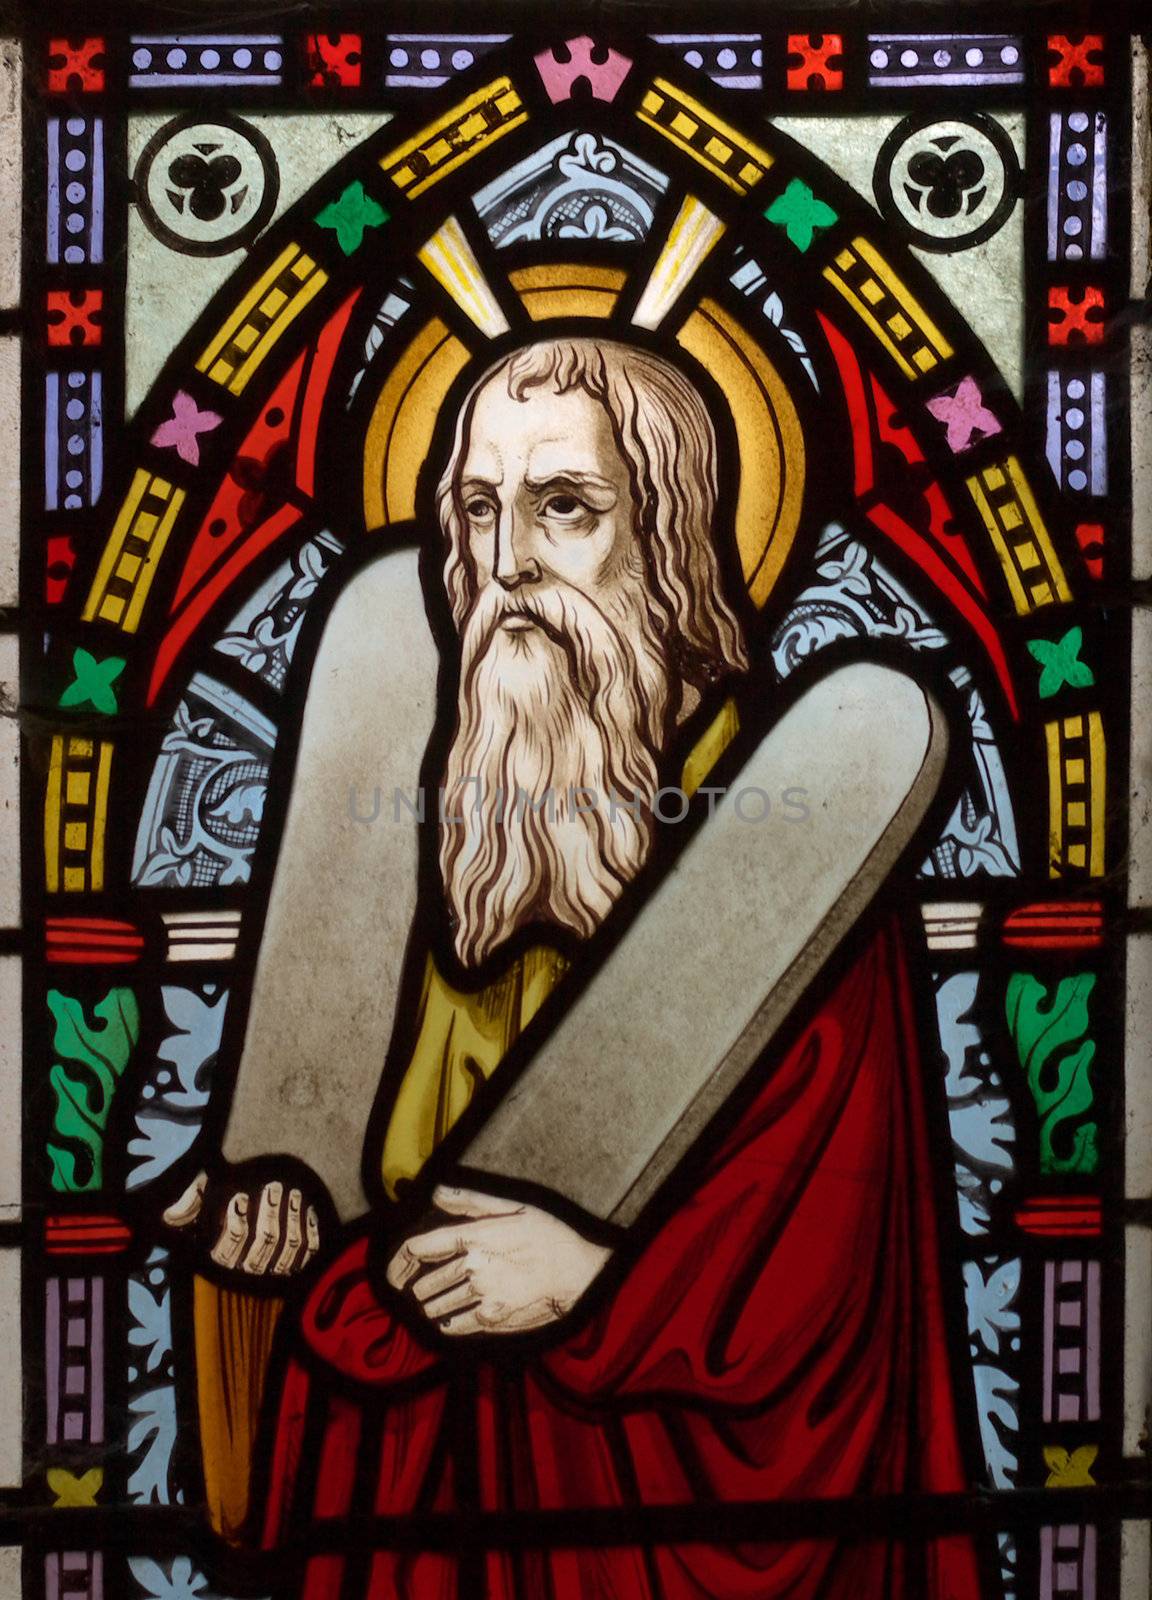 detail of victorian stained glass church window in Fringford depicting Moses with the tablets of covenant in his arms, interestingly without text, means he is pictured before climbing Mount Sinai